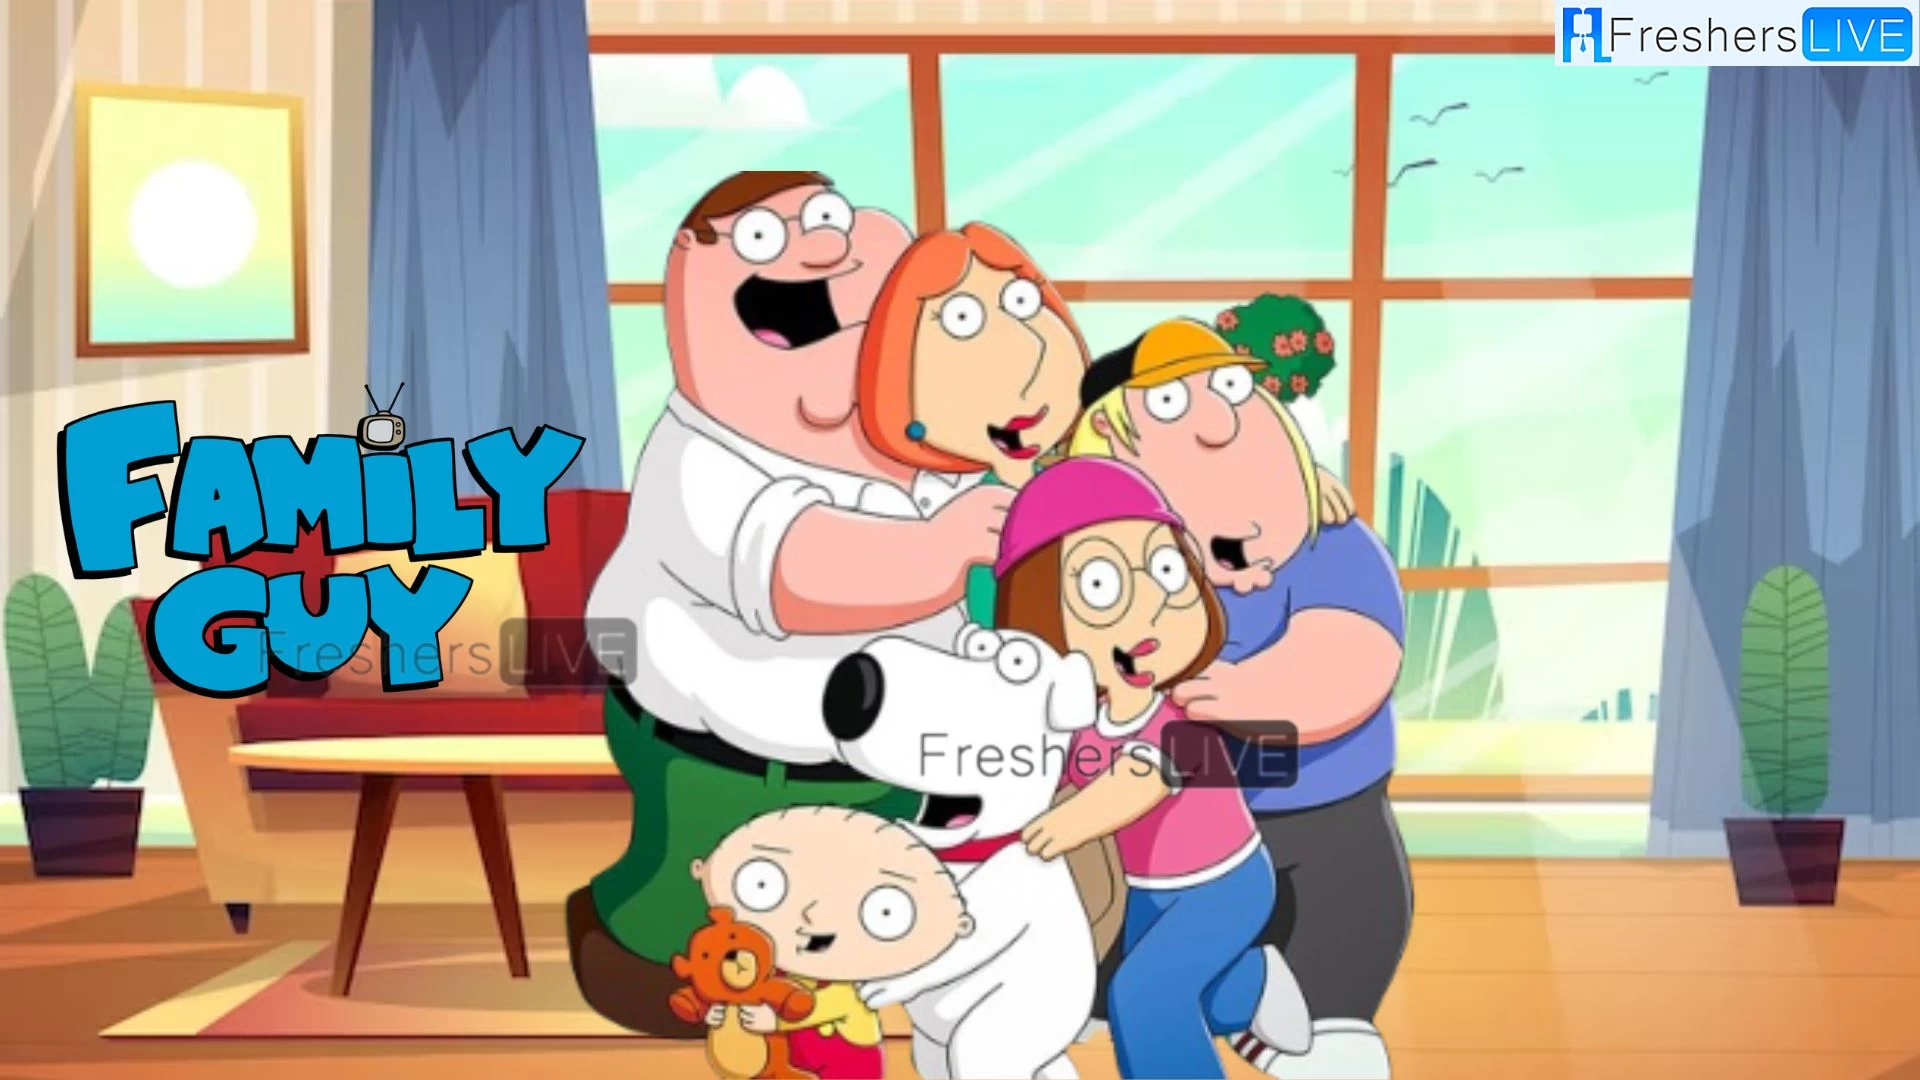 Family Guy Season 22 Episode 1 Ending Explained, Release Date, Cast, Review, Where to Watch and More